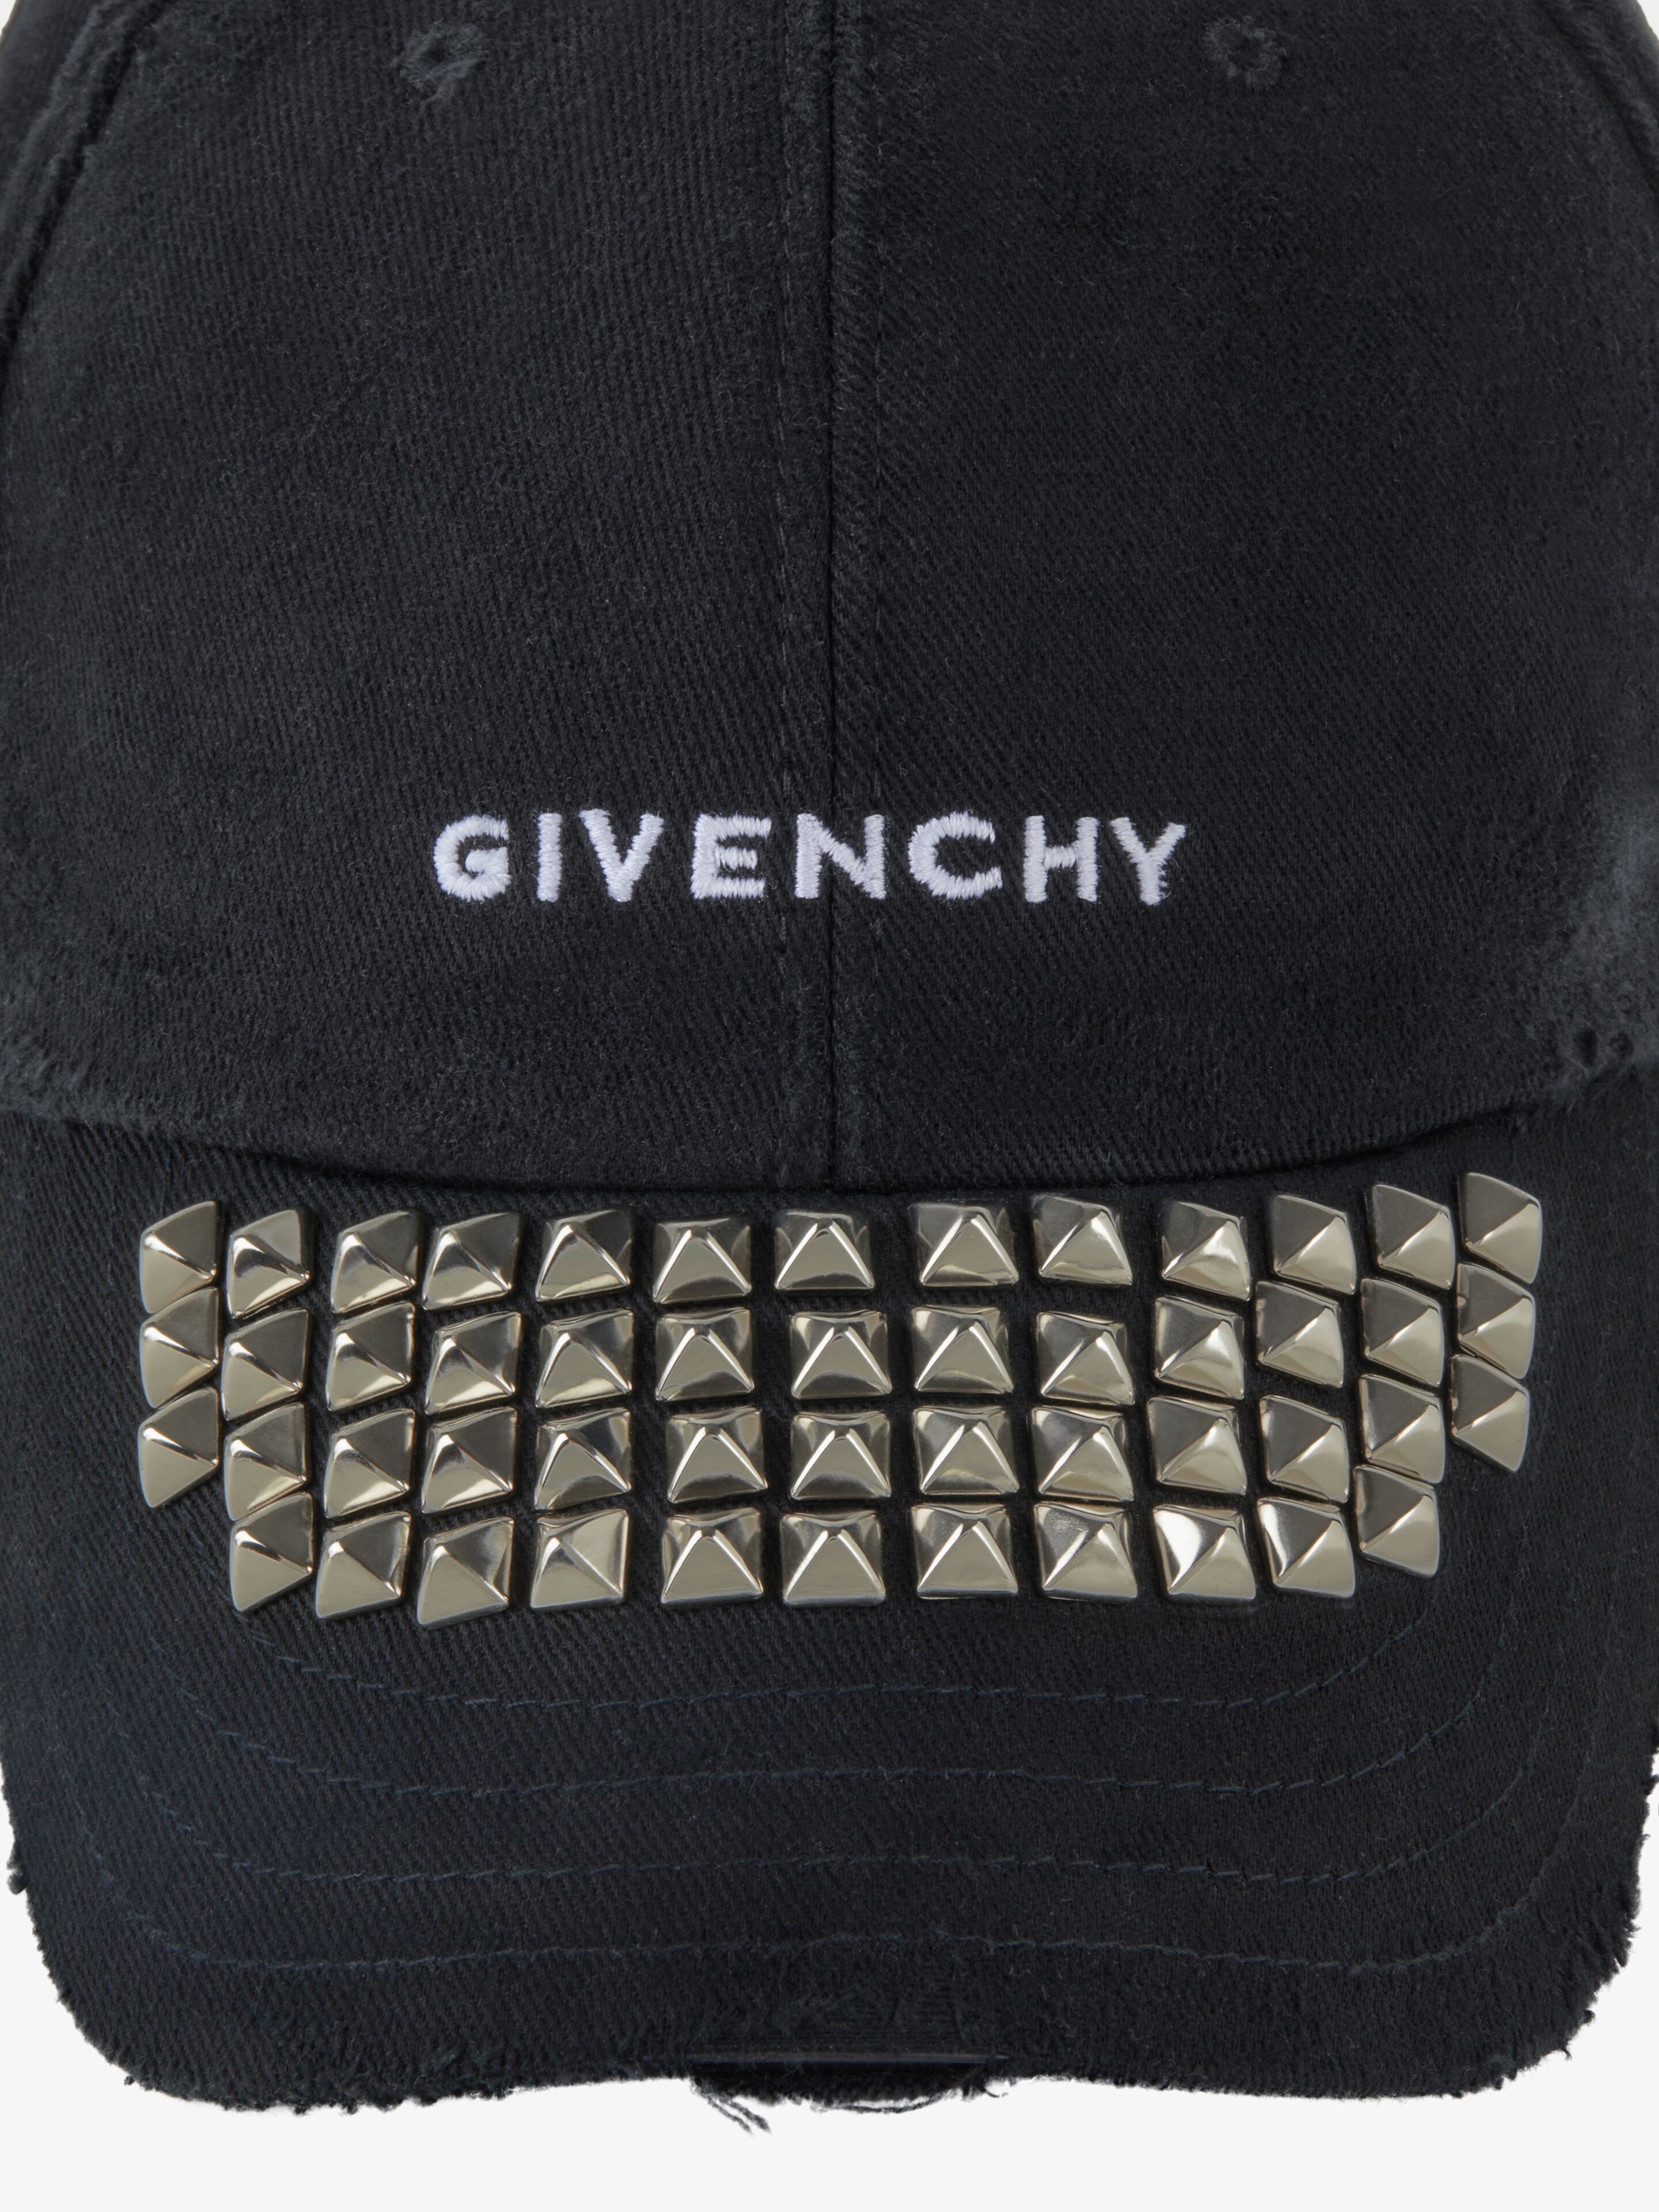 GIVENCHY CAP IN RIPPED & REPAIRED COTTON WITH STUDS - 2